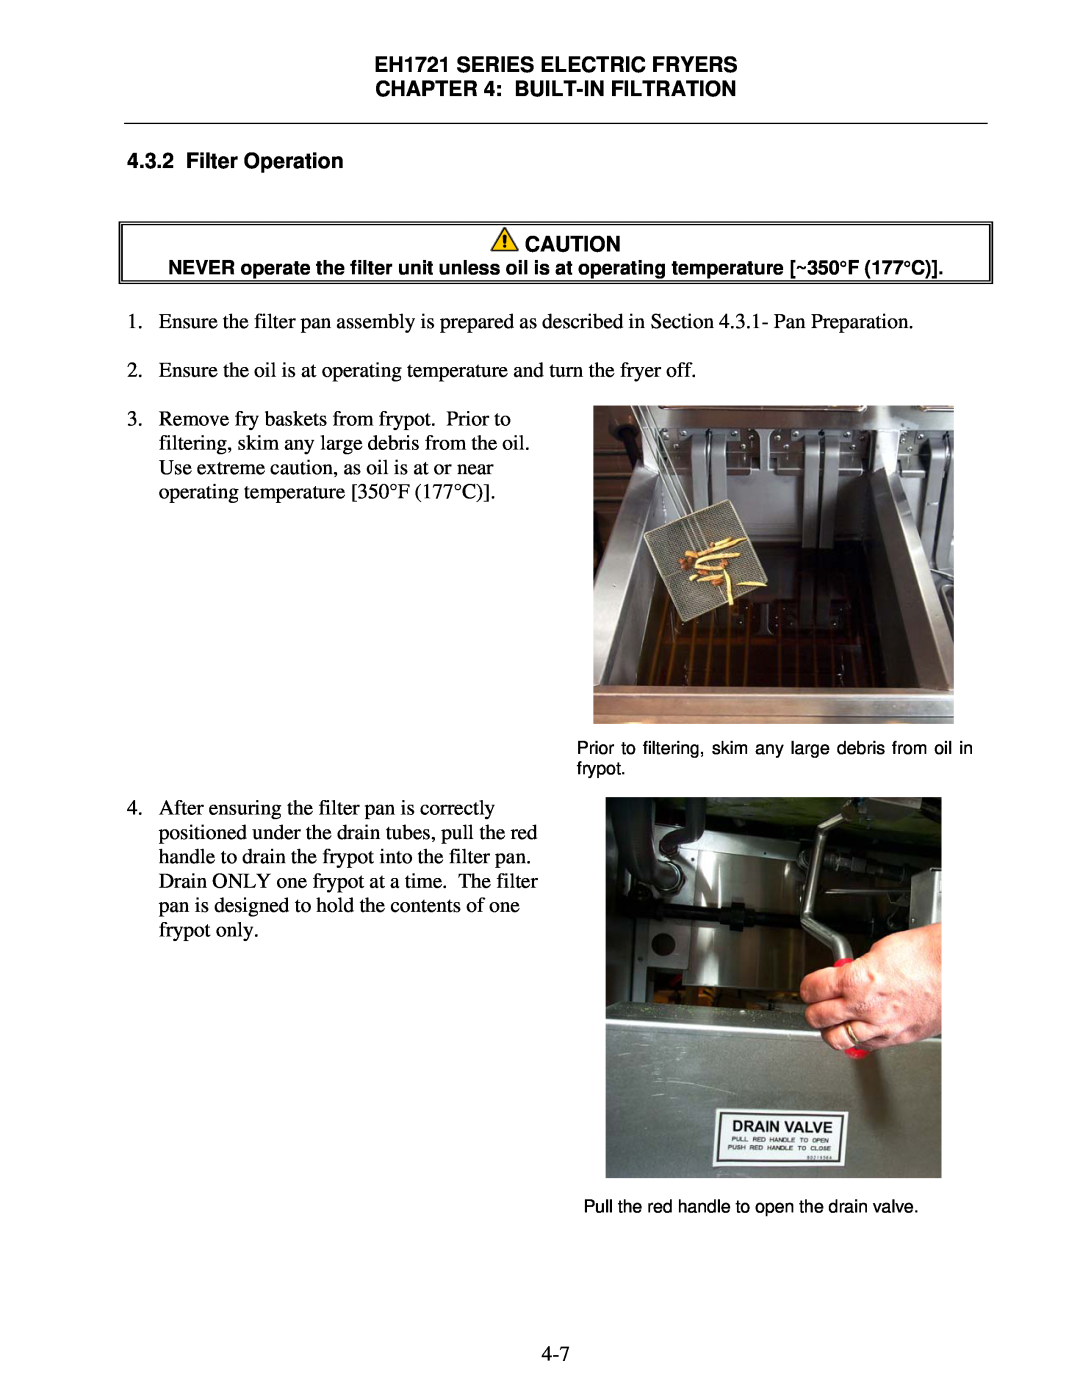 Frymaster BIH1721, FPH1721 operation manual Ensure the oil is at operating temperature and turn the fryer off 